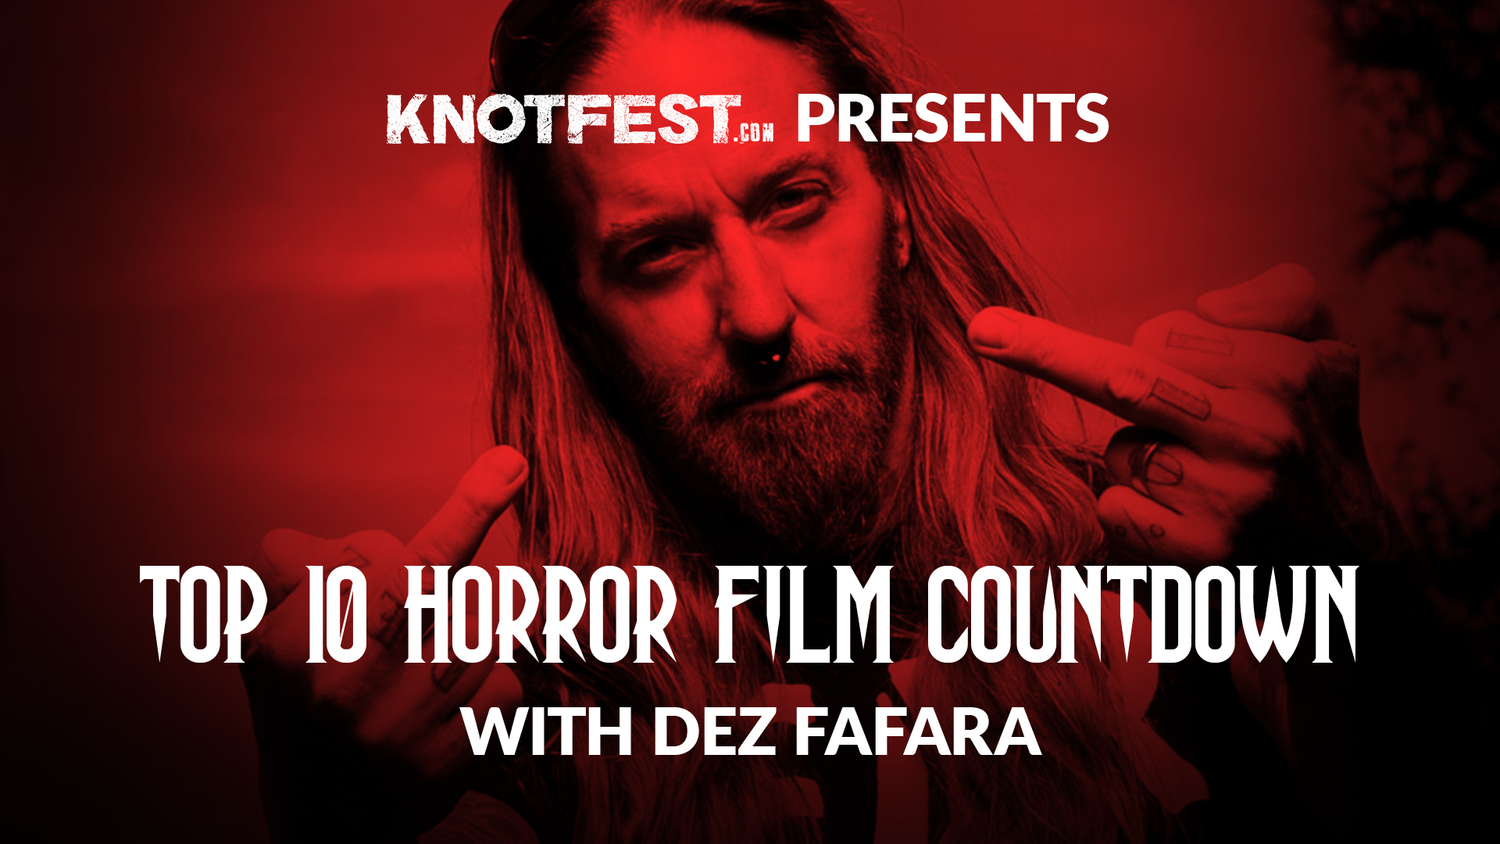 From the occult to the supernatural, Devildriver's Dez Fafara details his ultimate list of horror flicks